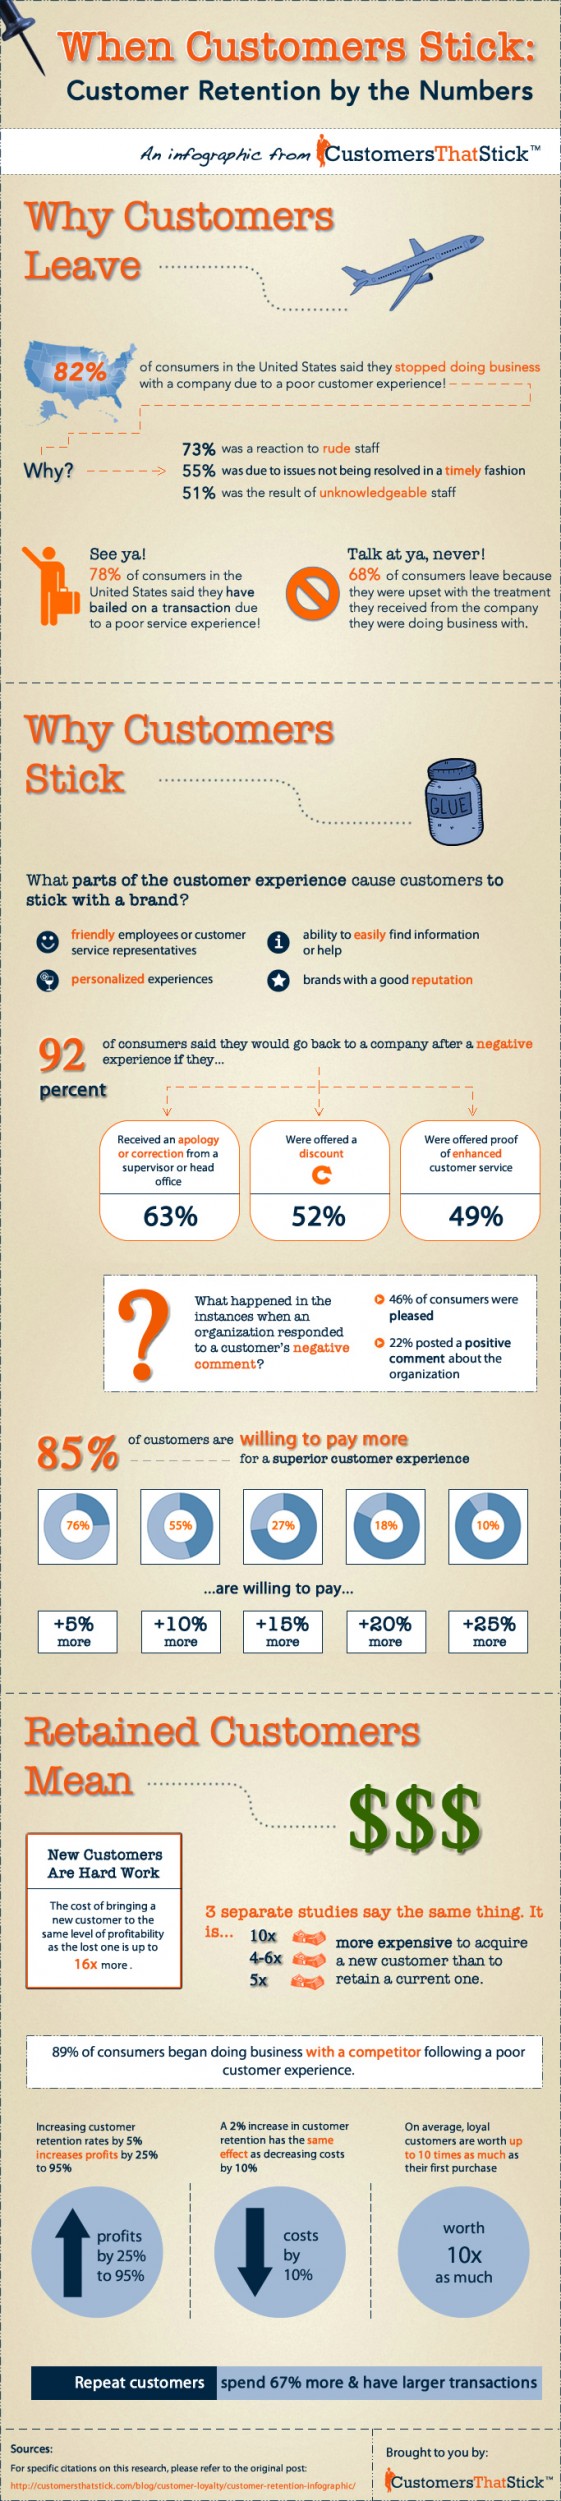 Customer Retention by the Numbers | Customer Service Infographic